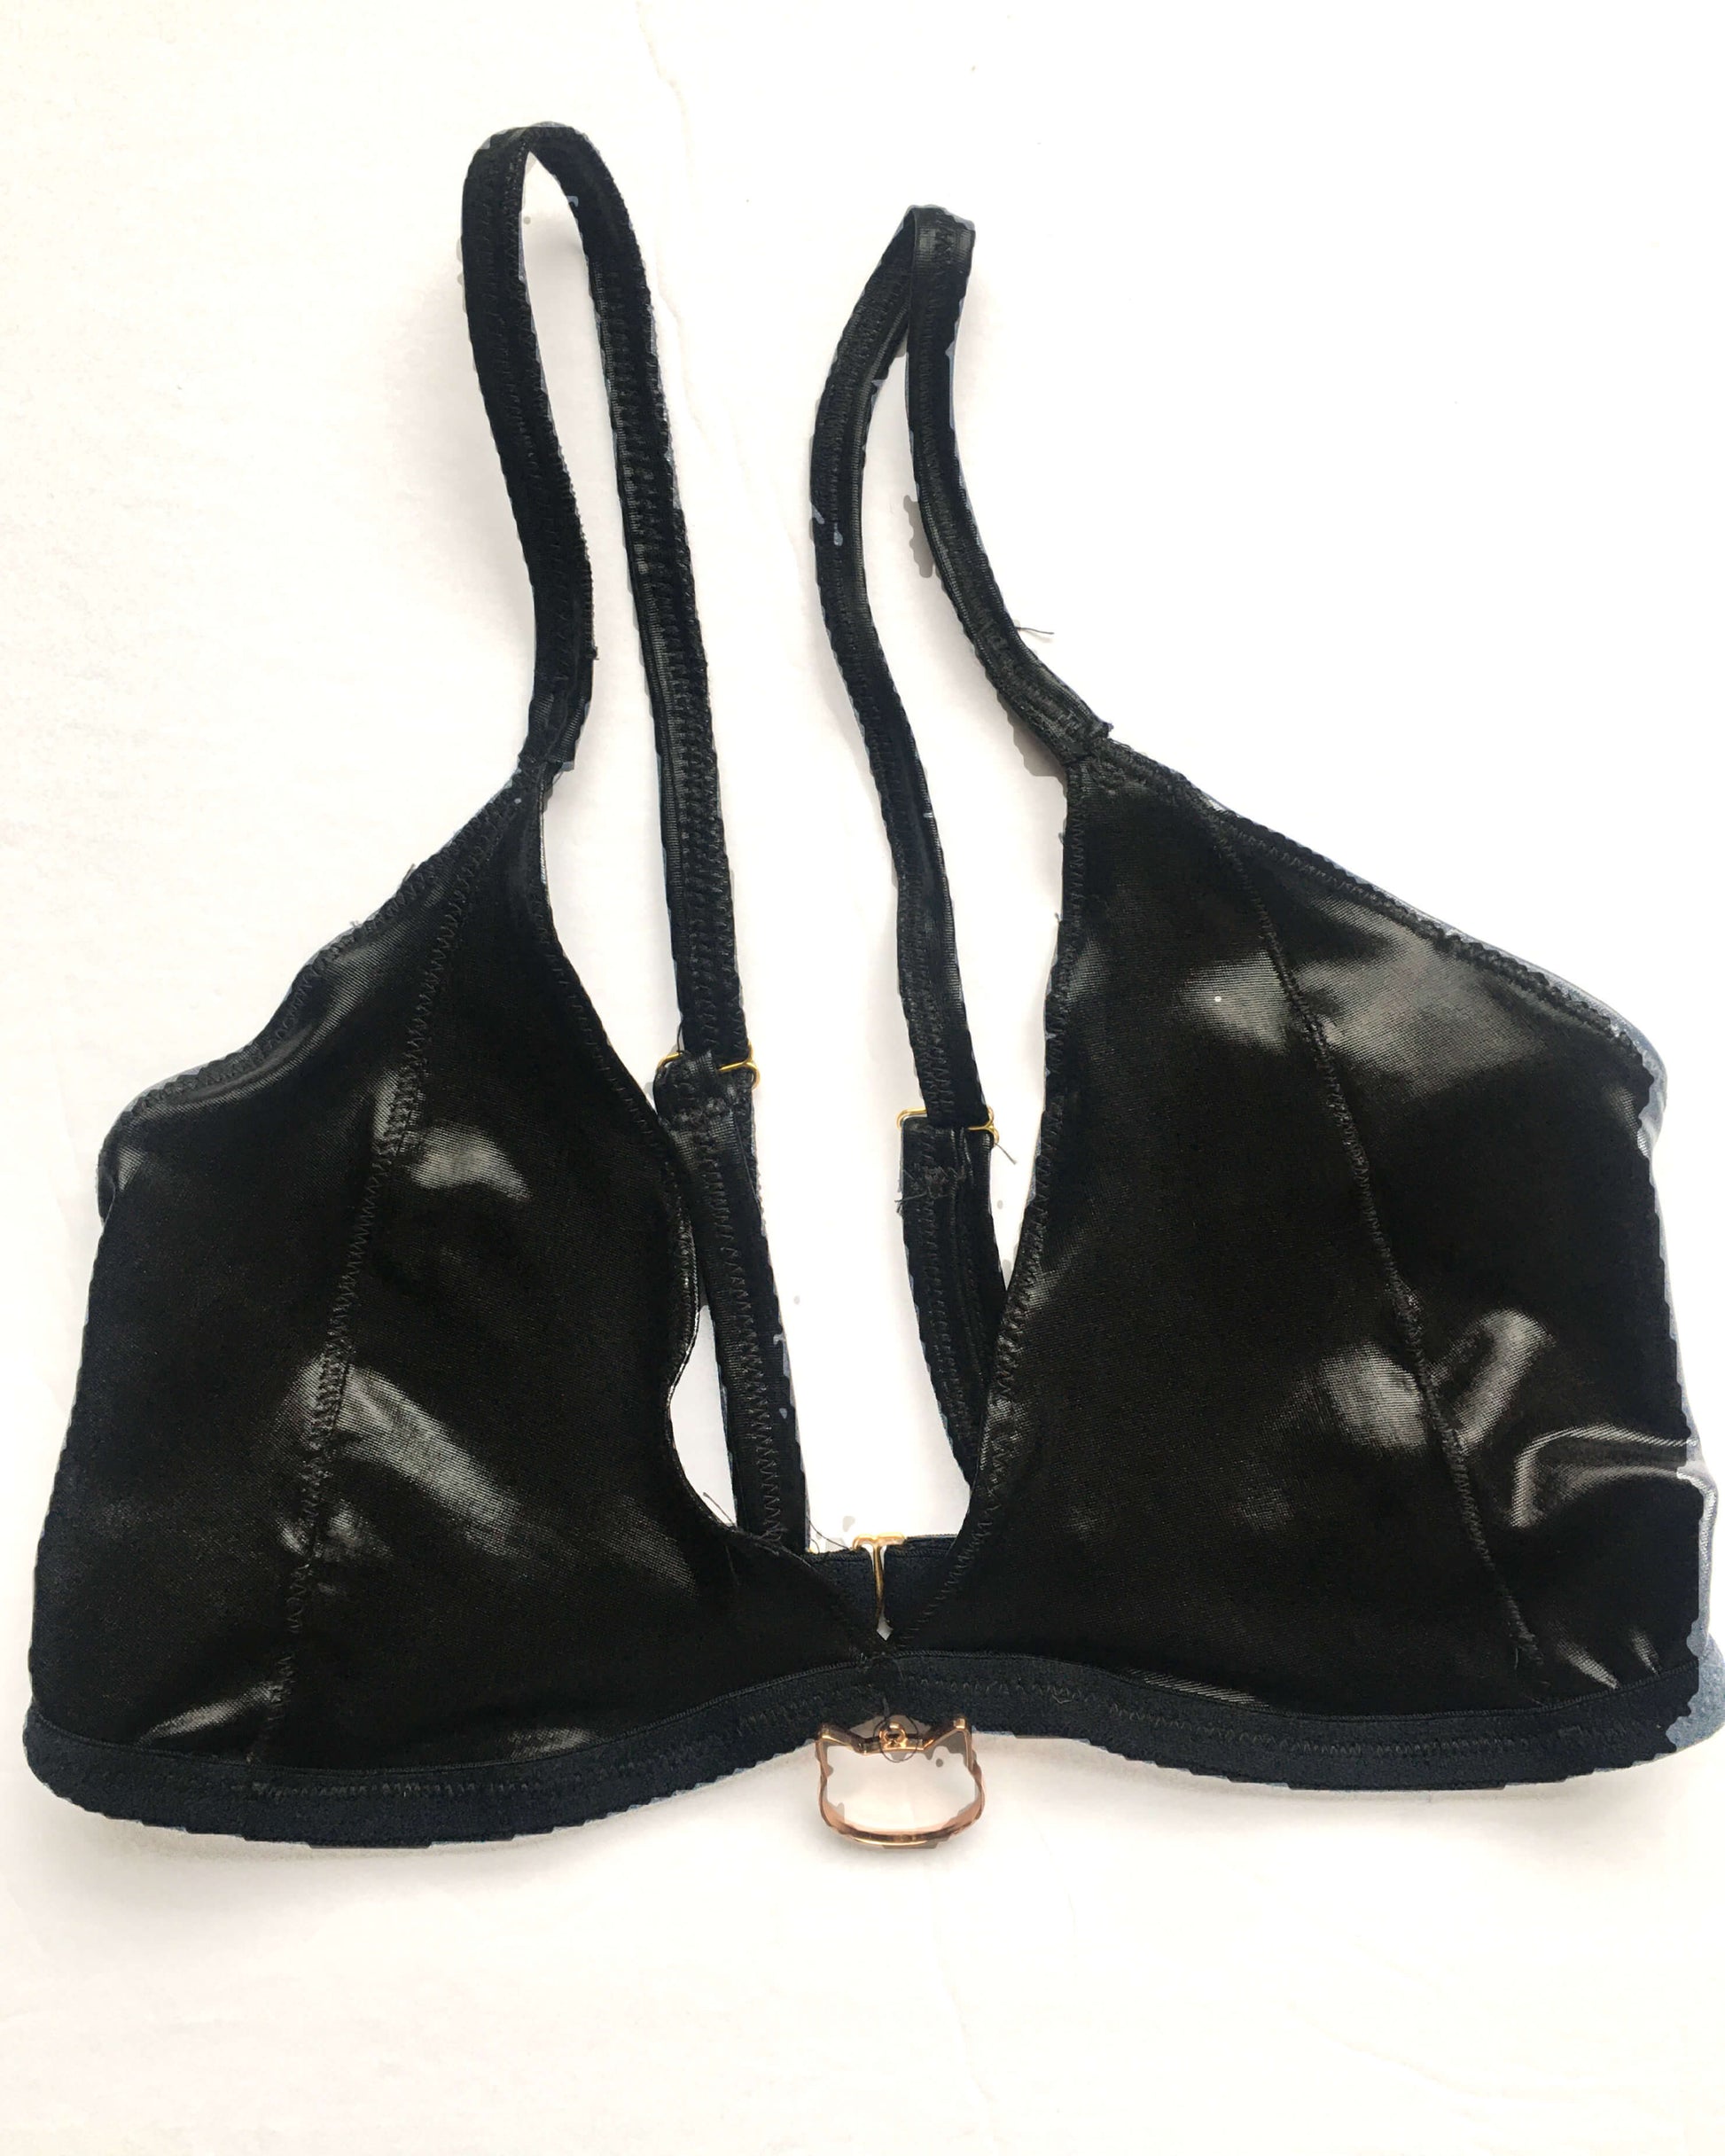 black lingerie with kitty hardware at center front